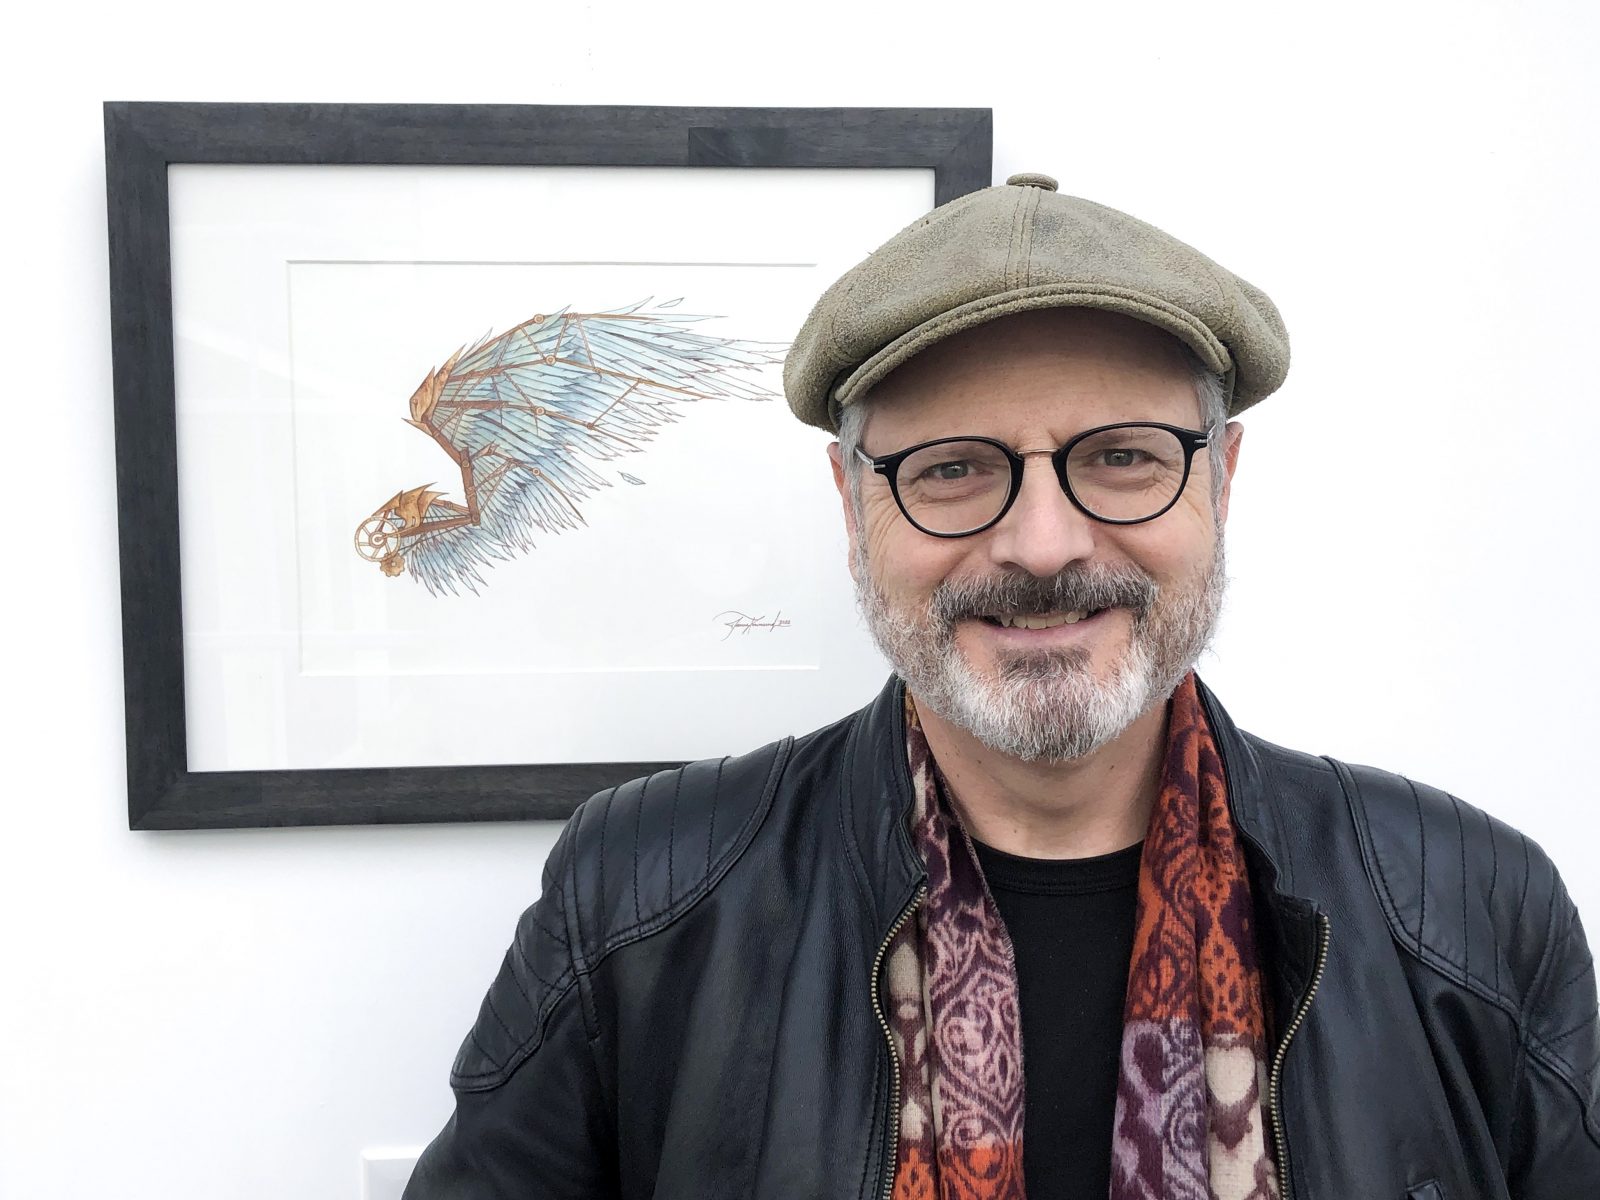 A portrait of Phil Mackintosh in a leather jacket and hat in front of artwork depicting a manufactured wing.